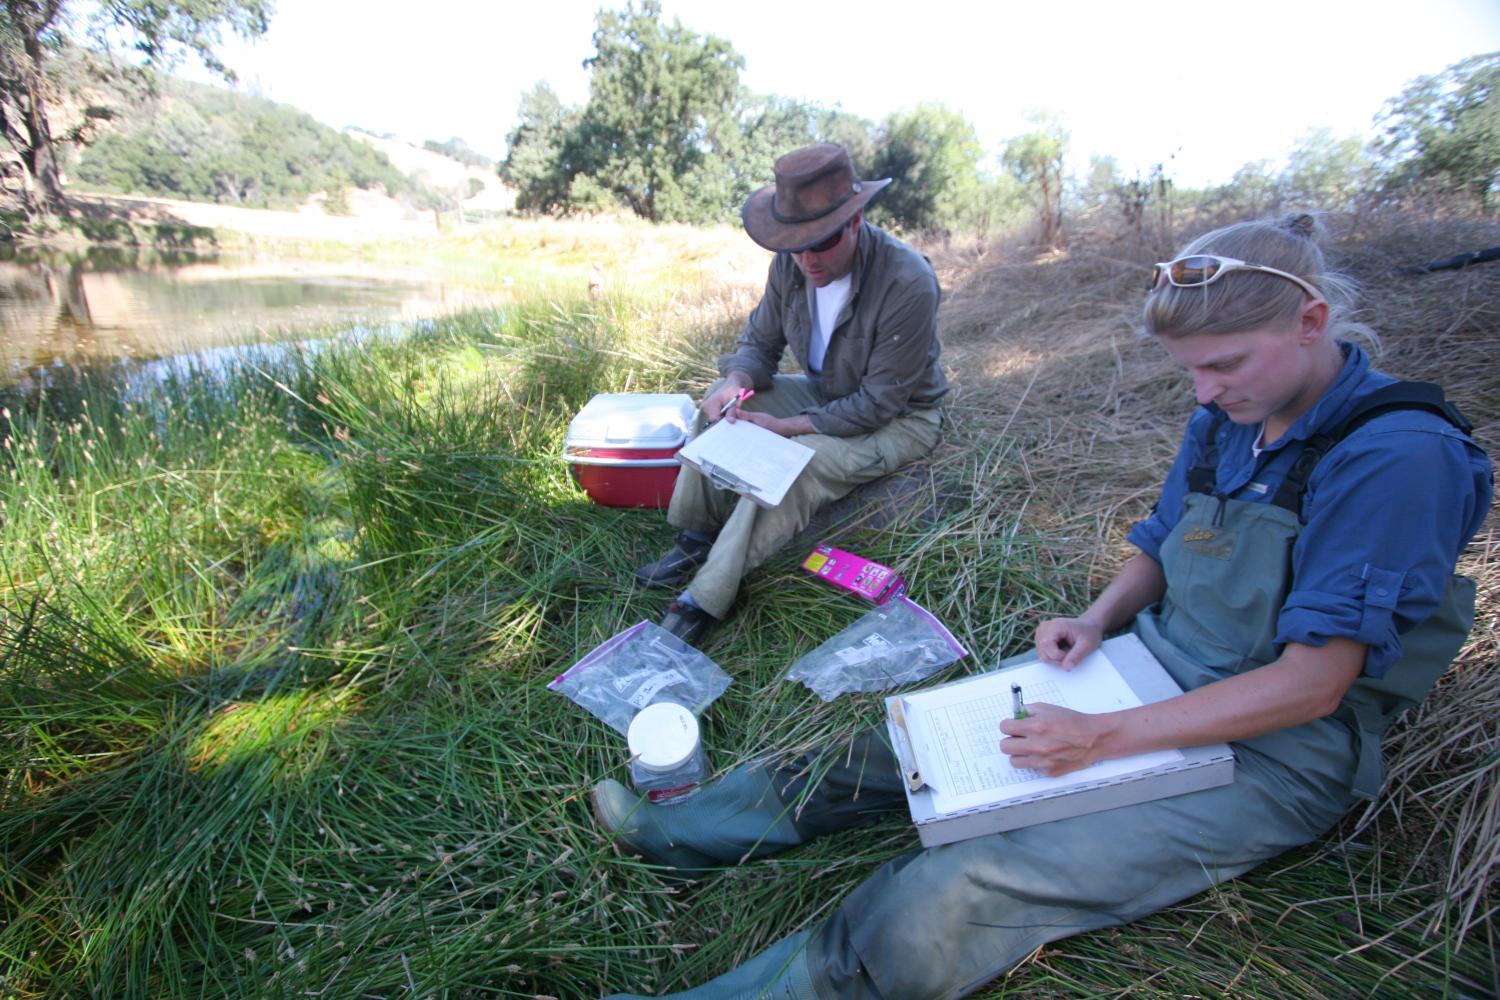 Katie and Piet working in the field